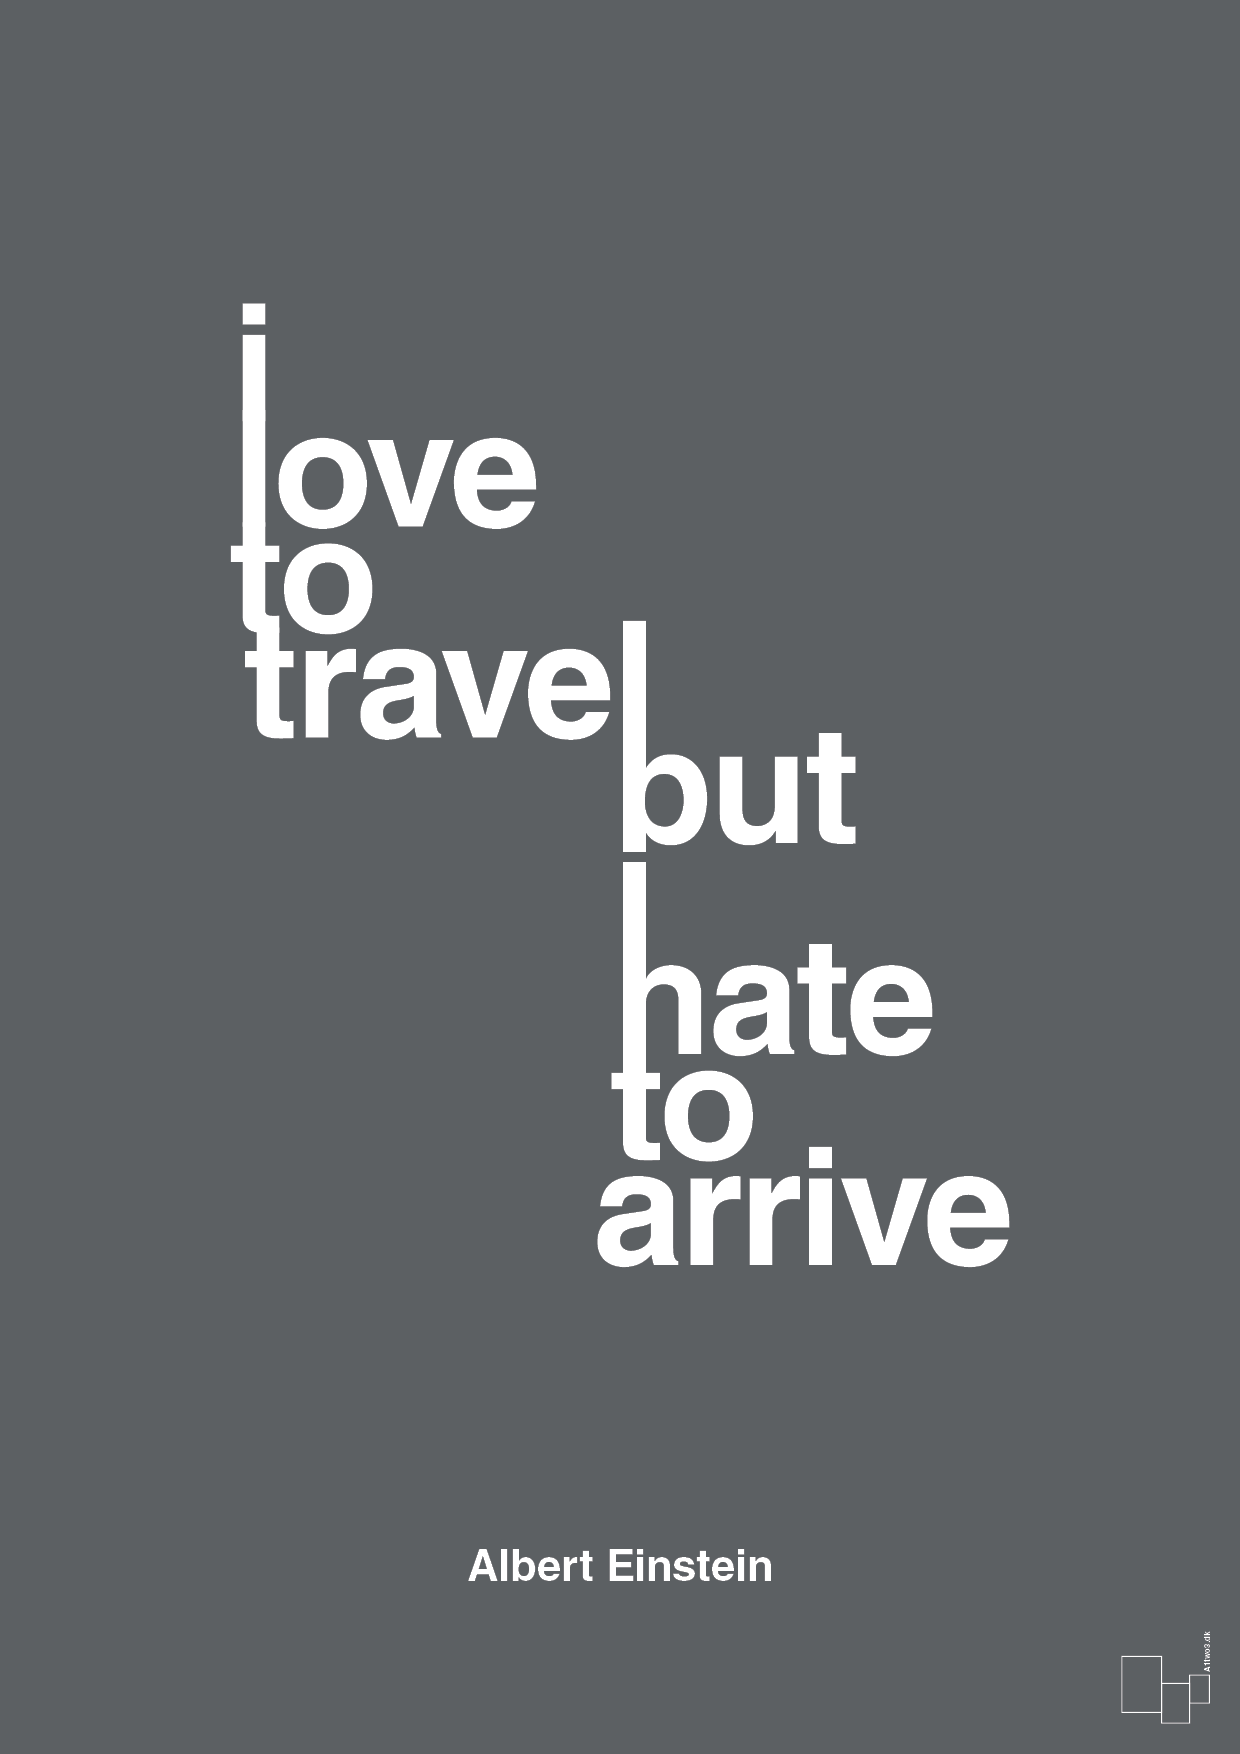 i love to travel but hate to arrive - Plakat med Citater i Graphic Charcoal